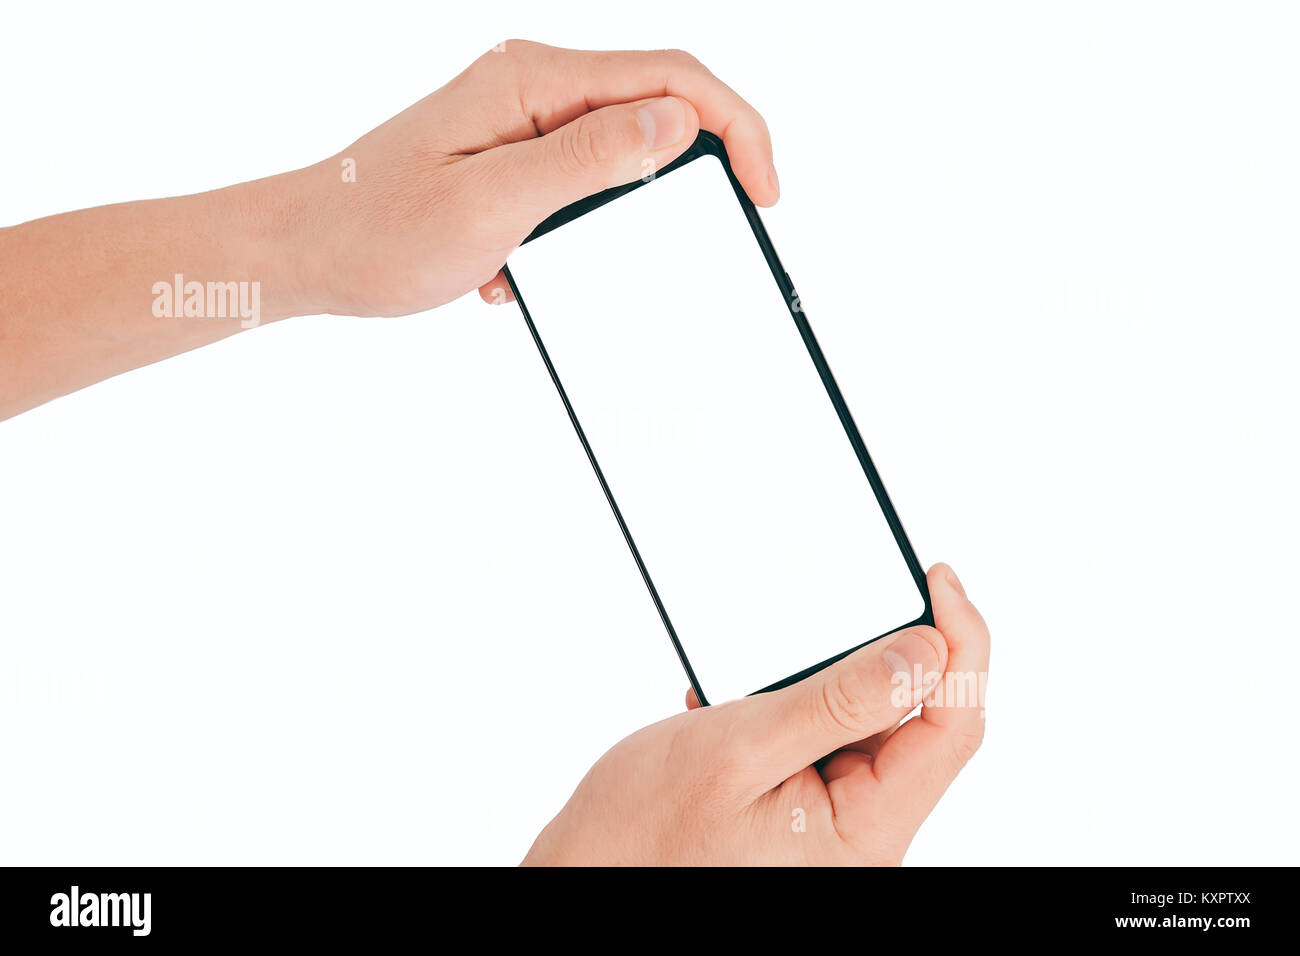 Smartphone Mock up,Two Hand holding mobile phone with black screen isolated on white background with clipping path for design. Stock Photo